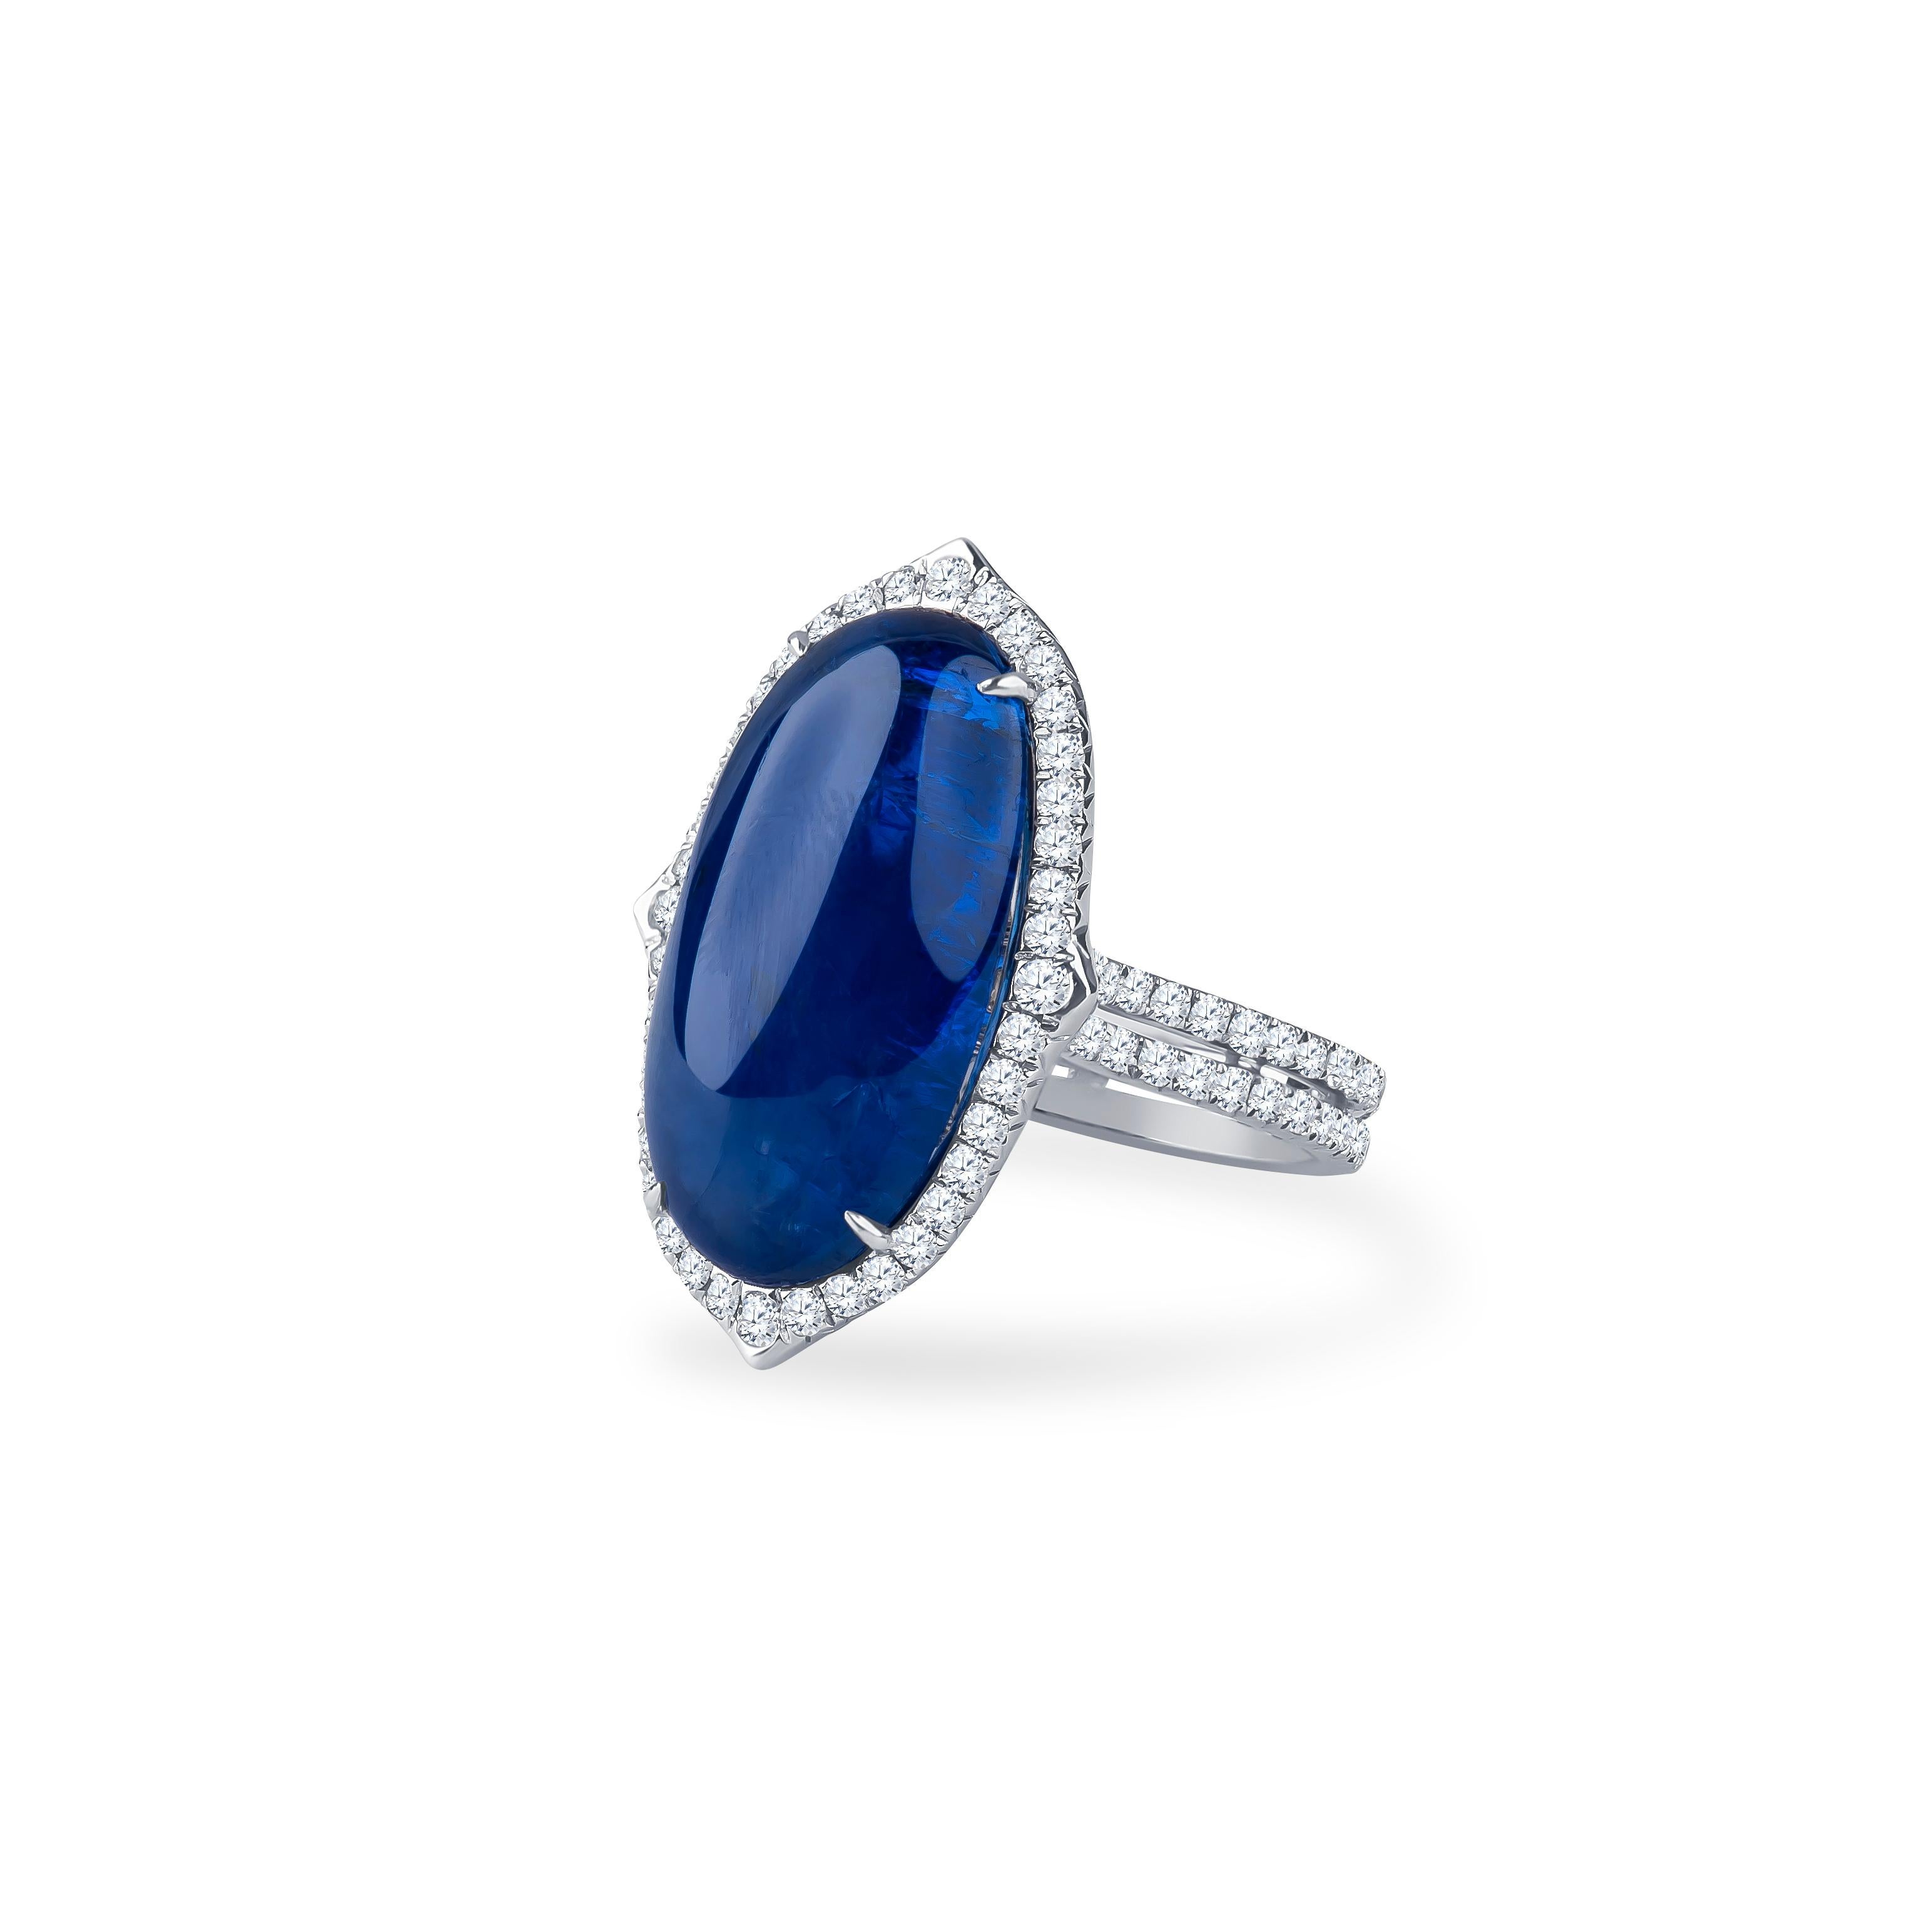 13.91 Carat unheated oval blue Burmese sapphire (GRS colored stone report) with 1.34 carats total weight in round brilliant diamonds set in an 18k white gold ring. Diamond clarity SI1. Ring size 6.5, size is resize-able to larger or smaller upon